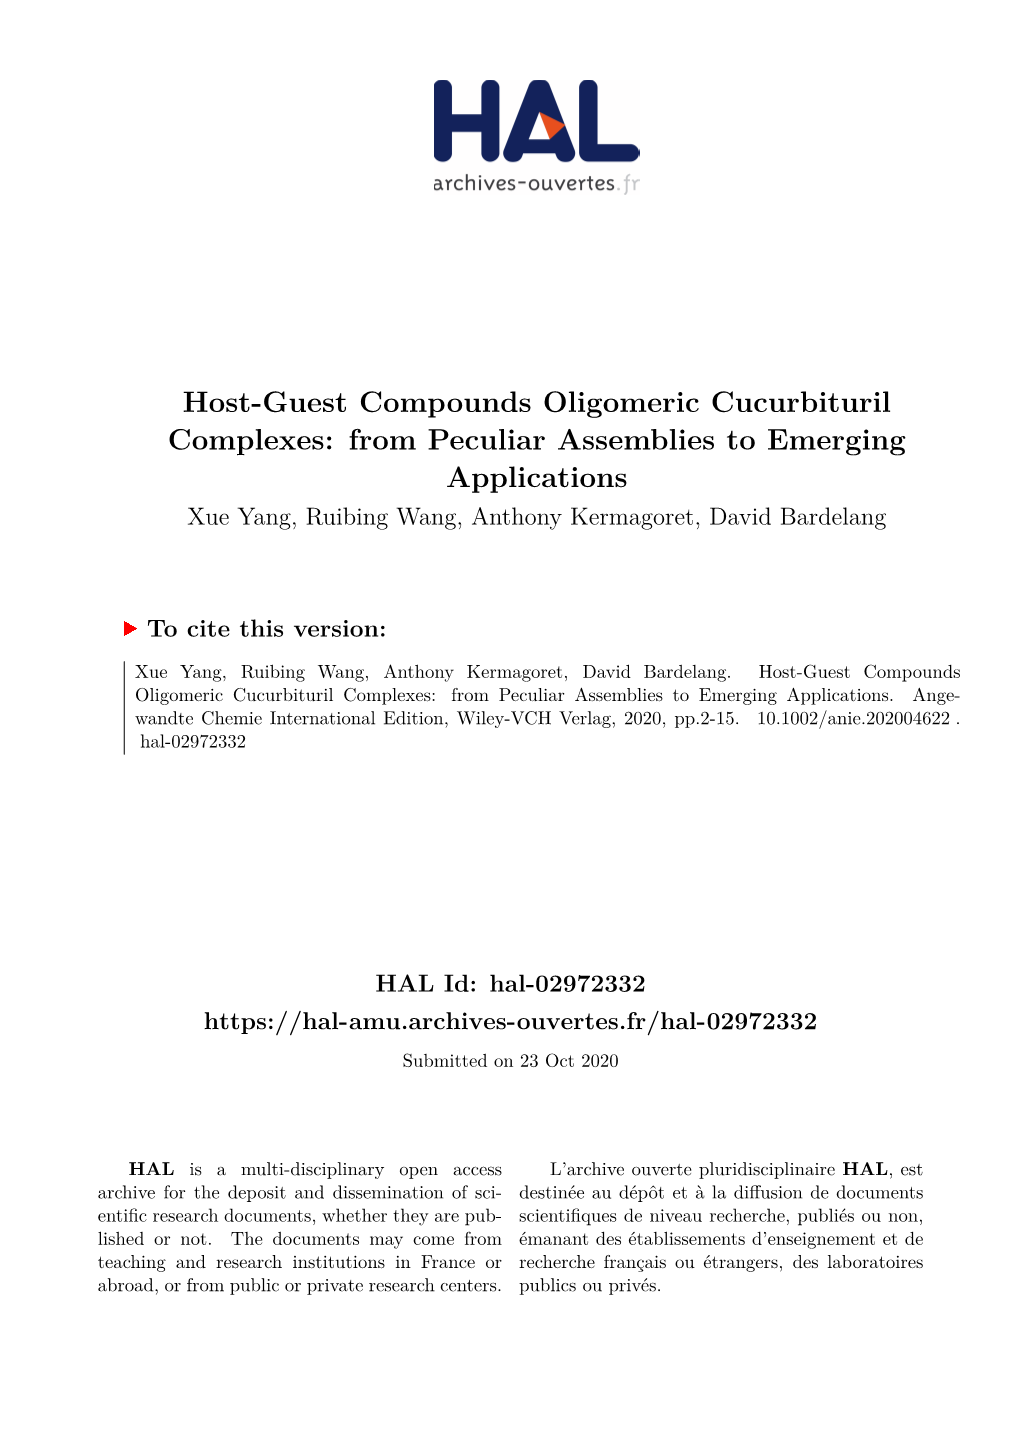 Host-Guest Compounds Oligomeric Cucurbituril Complexes: from Peculiar Assemblies to Emerging Applications Xue Yang, Ruibing Wang, Anthony Kermagoret, David Bardelang